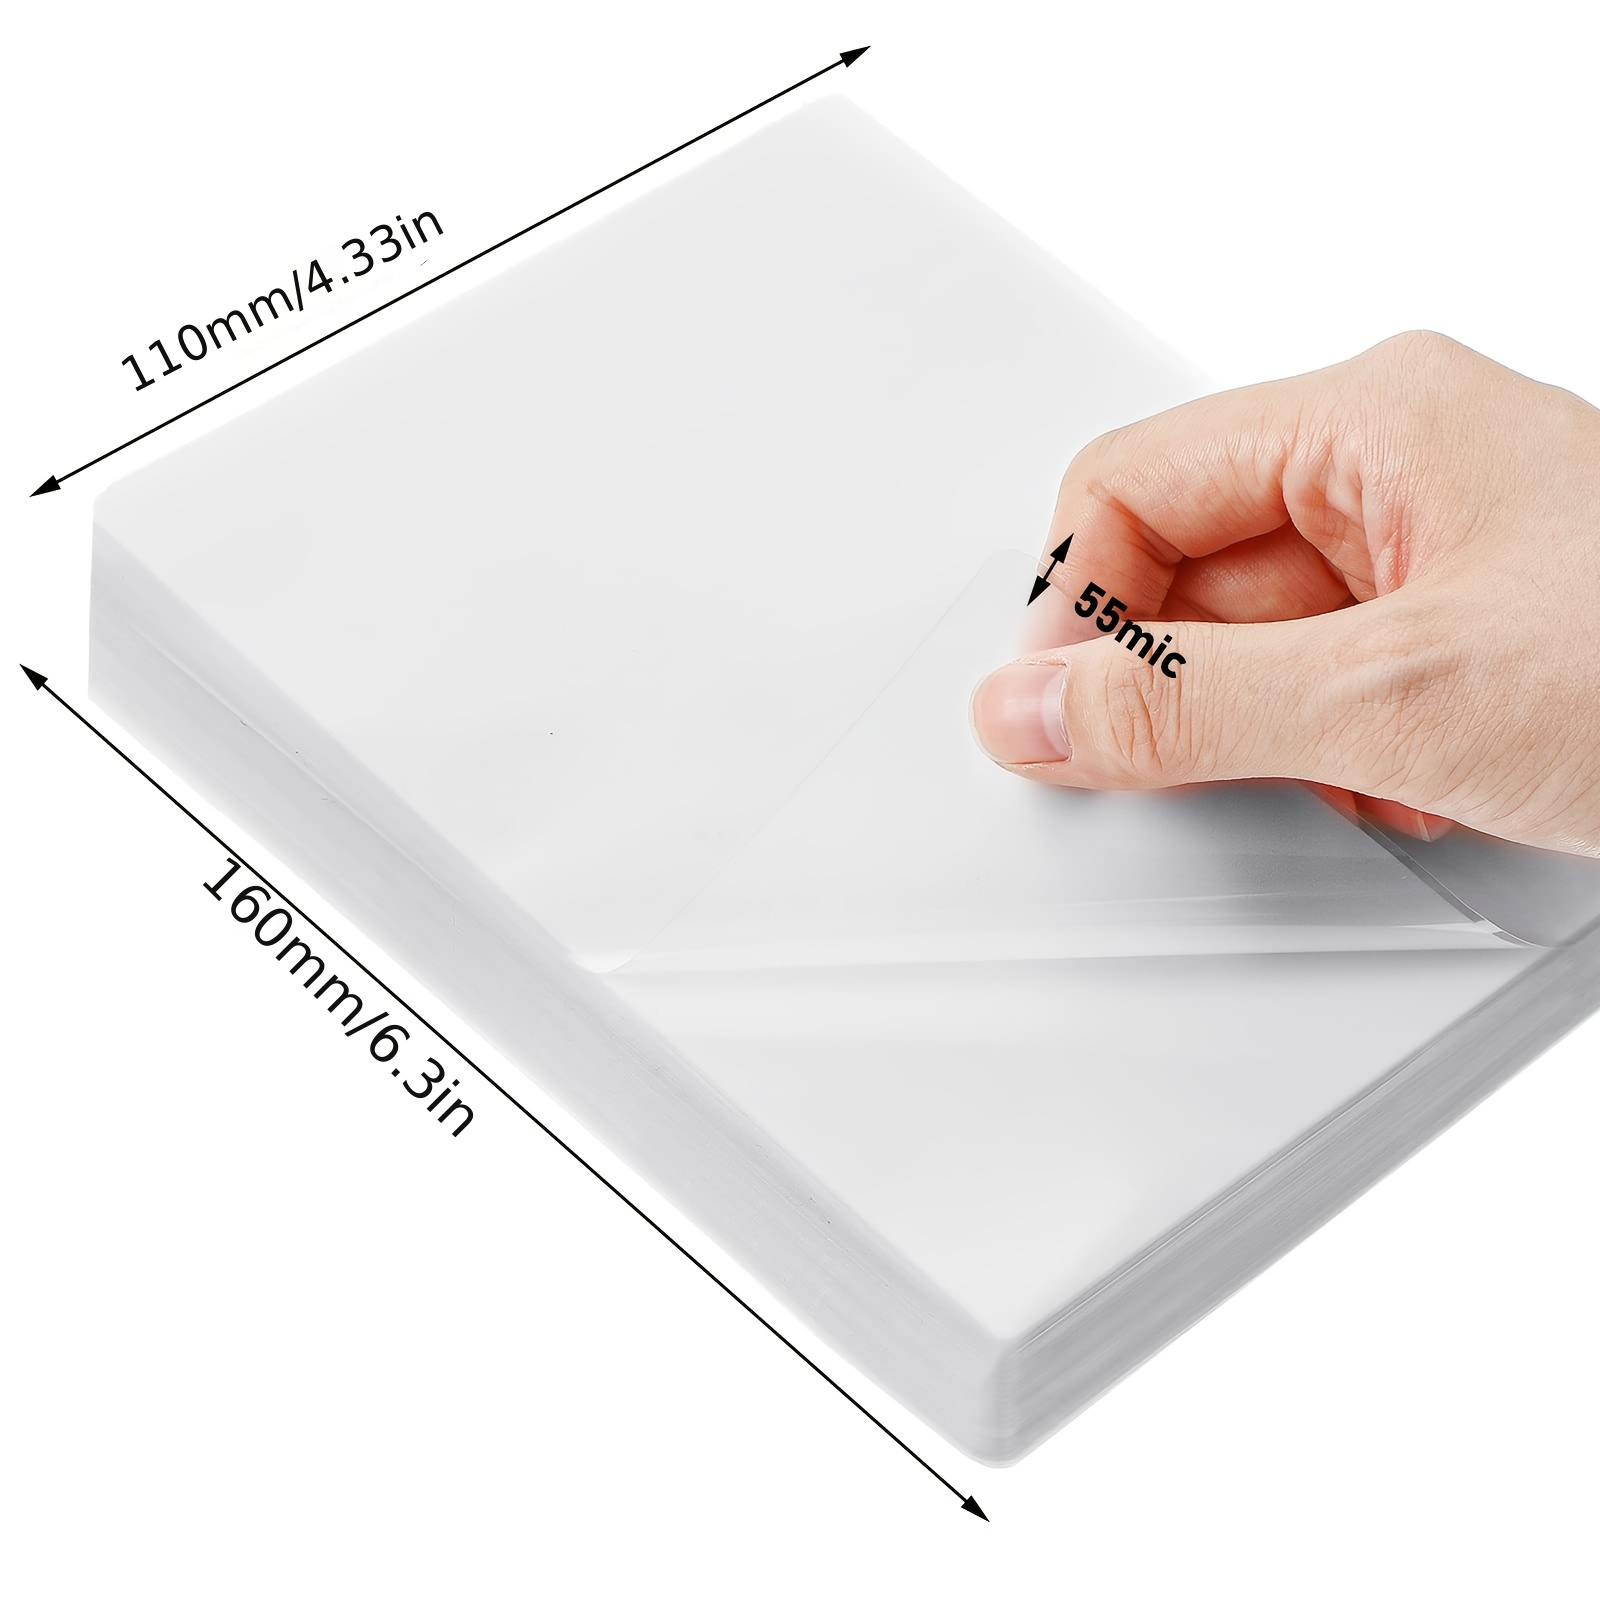 100pcs pack of 4 33 x 6 3 inch thermal laminating pouches available in clear paper plastic paper glossy and office laminating options suitable for letters photos cards and id badges